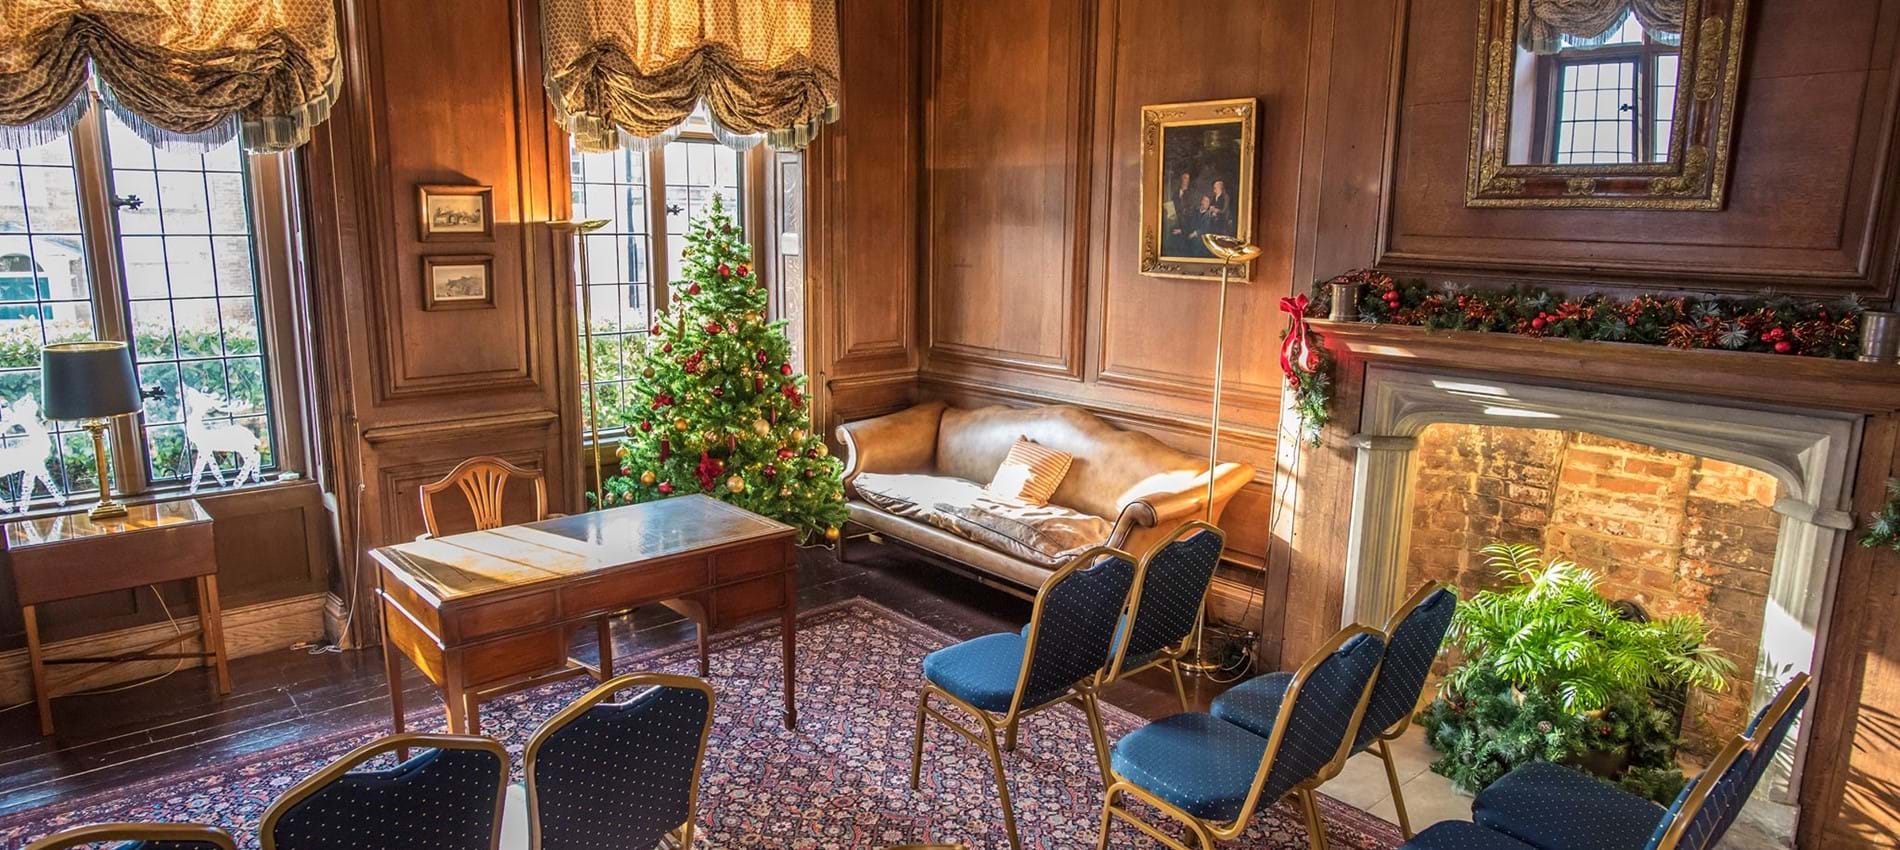 nojs The Warnham Room at Edes House with Christmas decorations